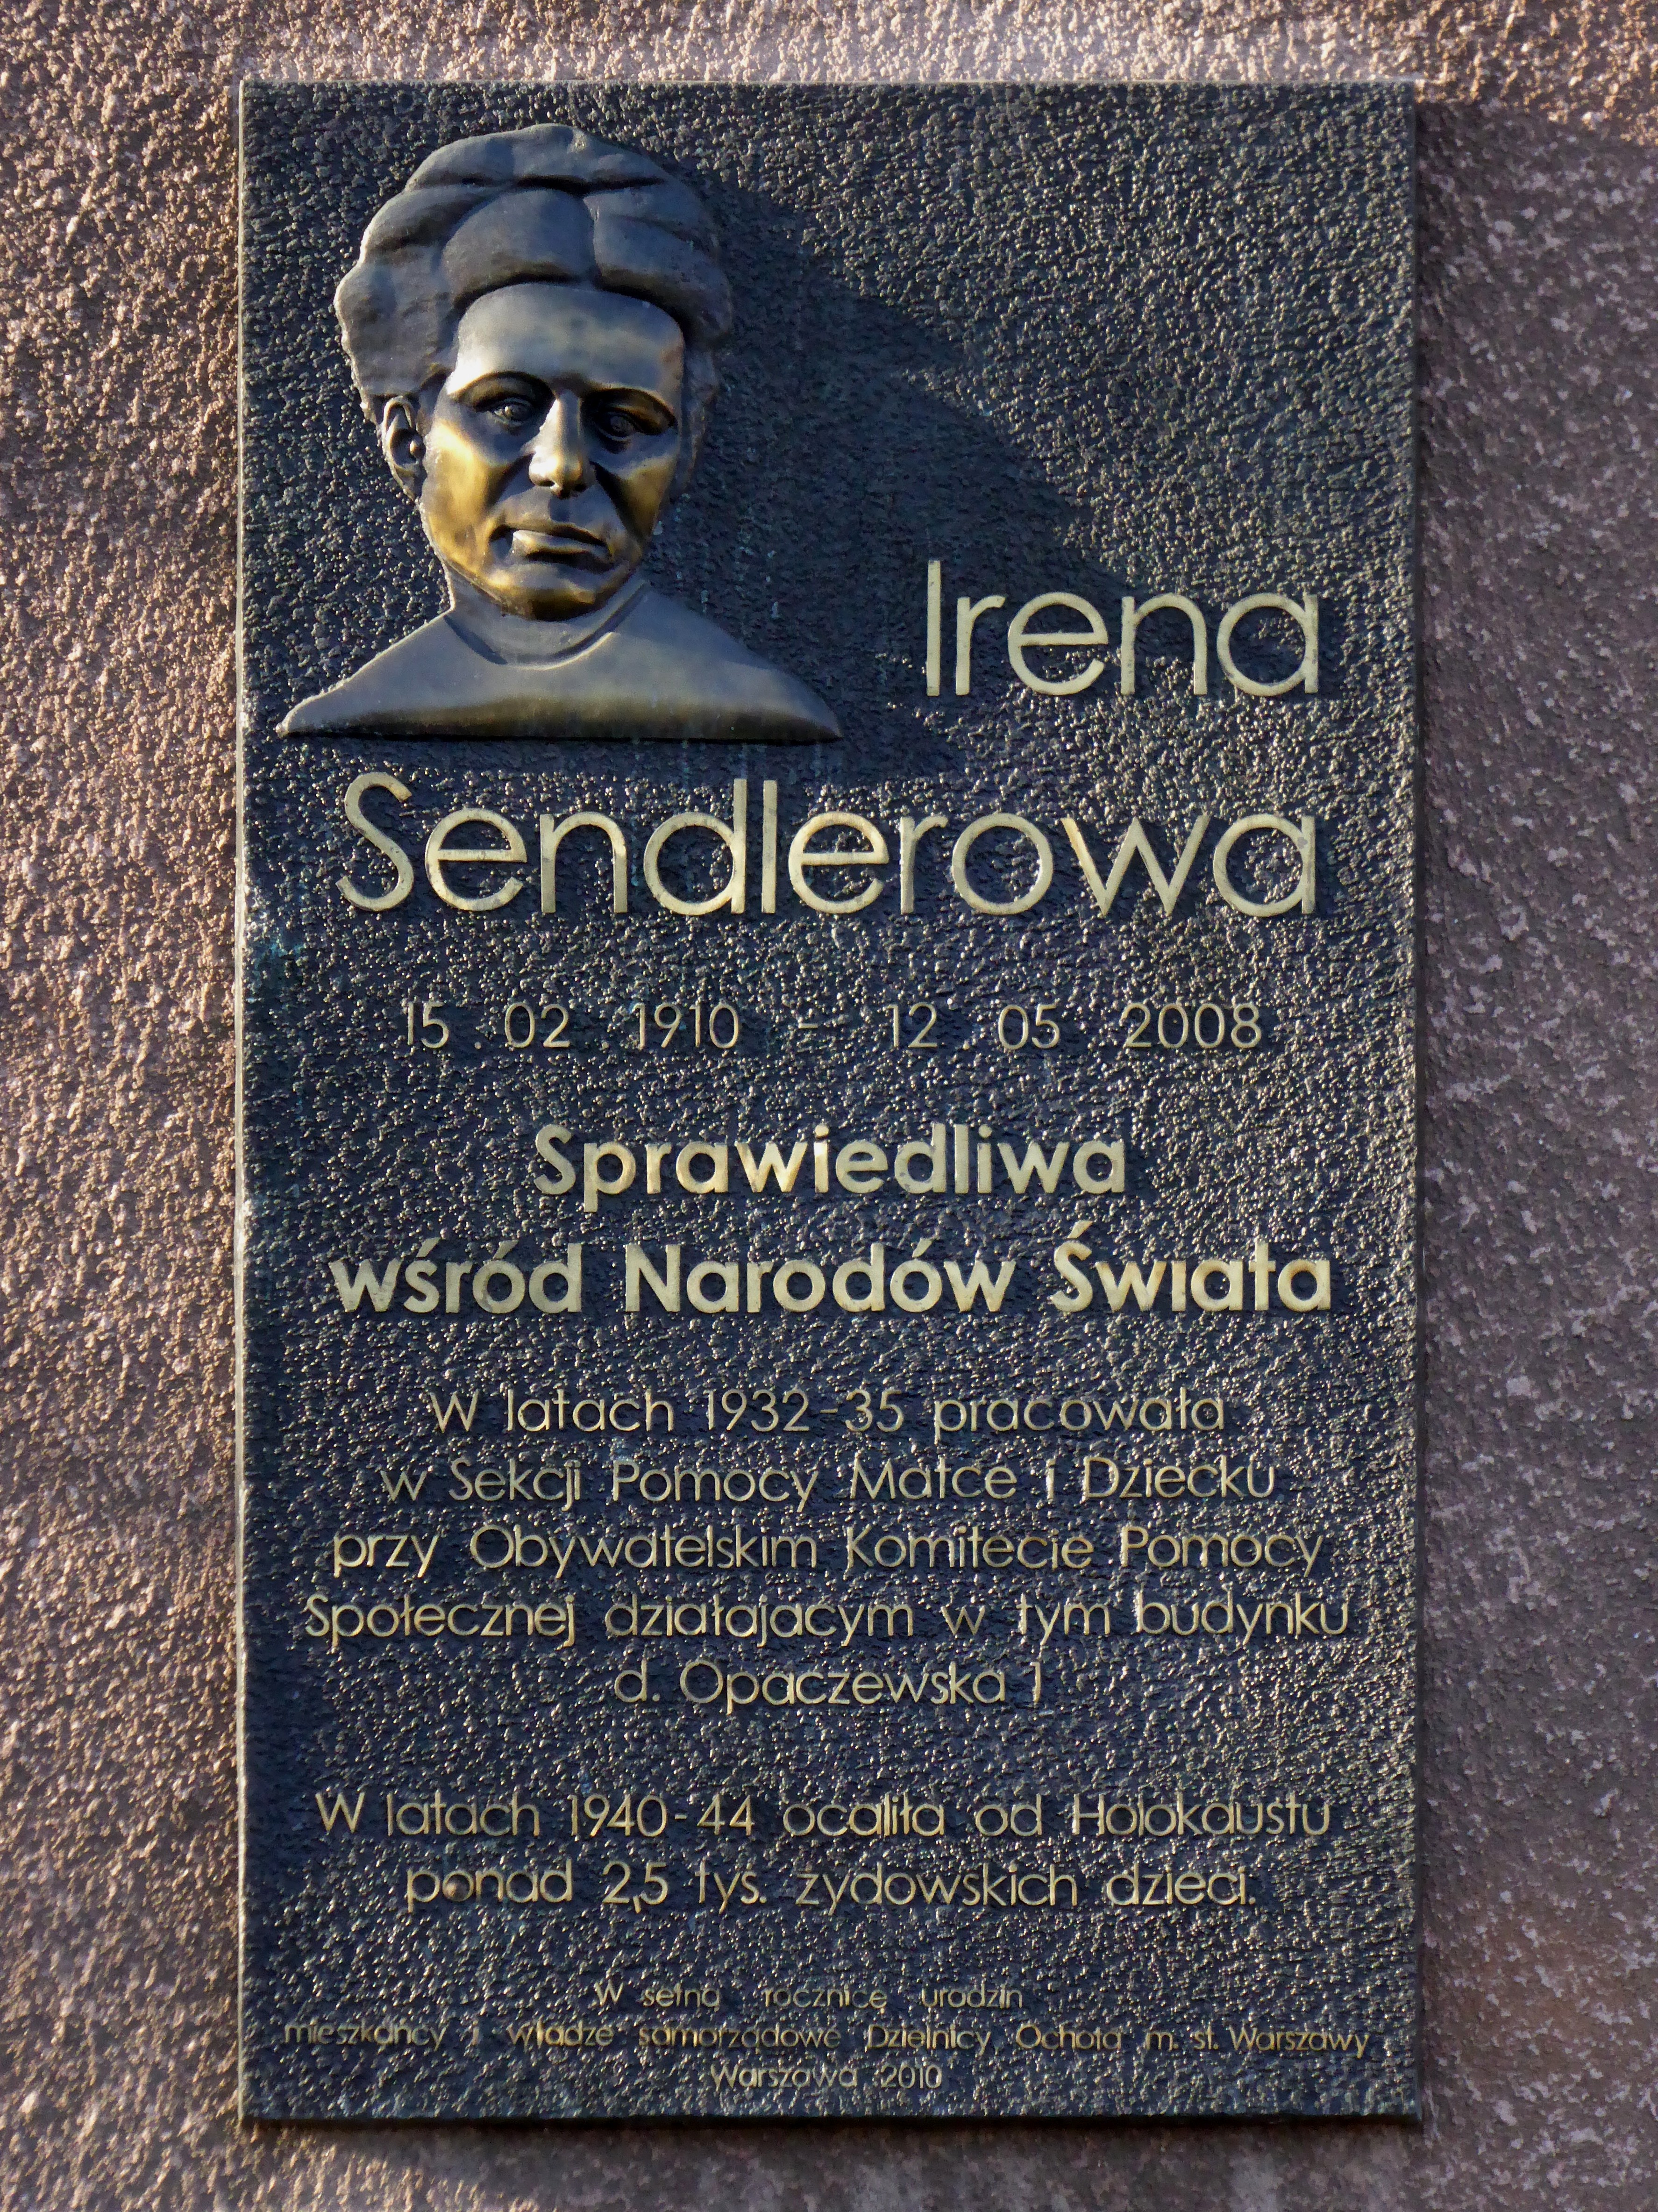 Wikipedia, Flickr images reviewed by FlickreviewR, Here-worked plaques in Warsaw, Irena Sendlerowa, 